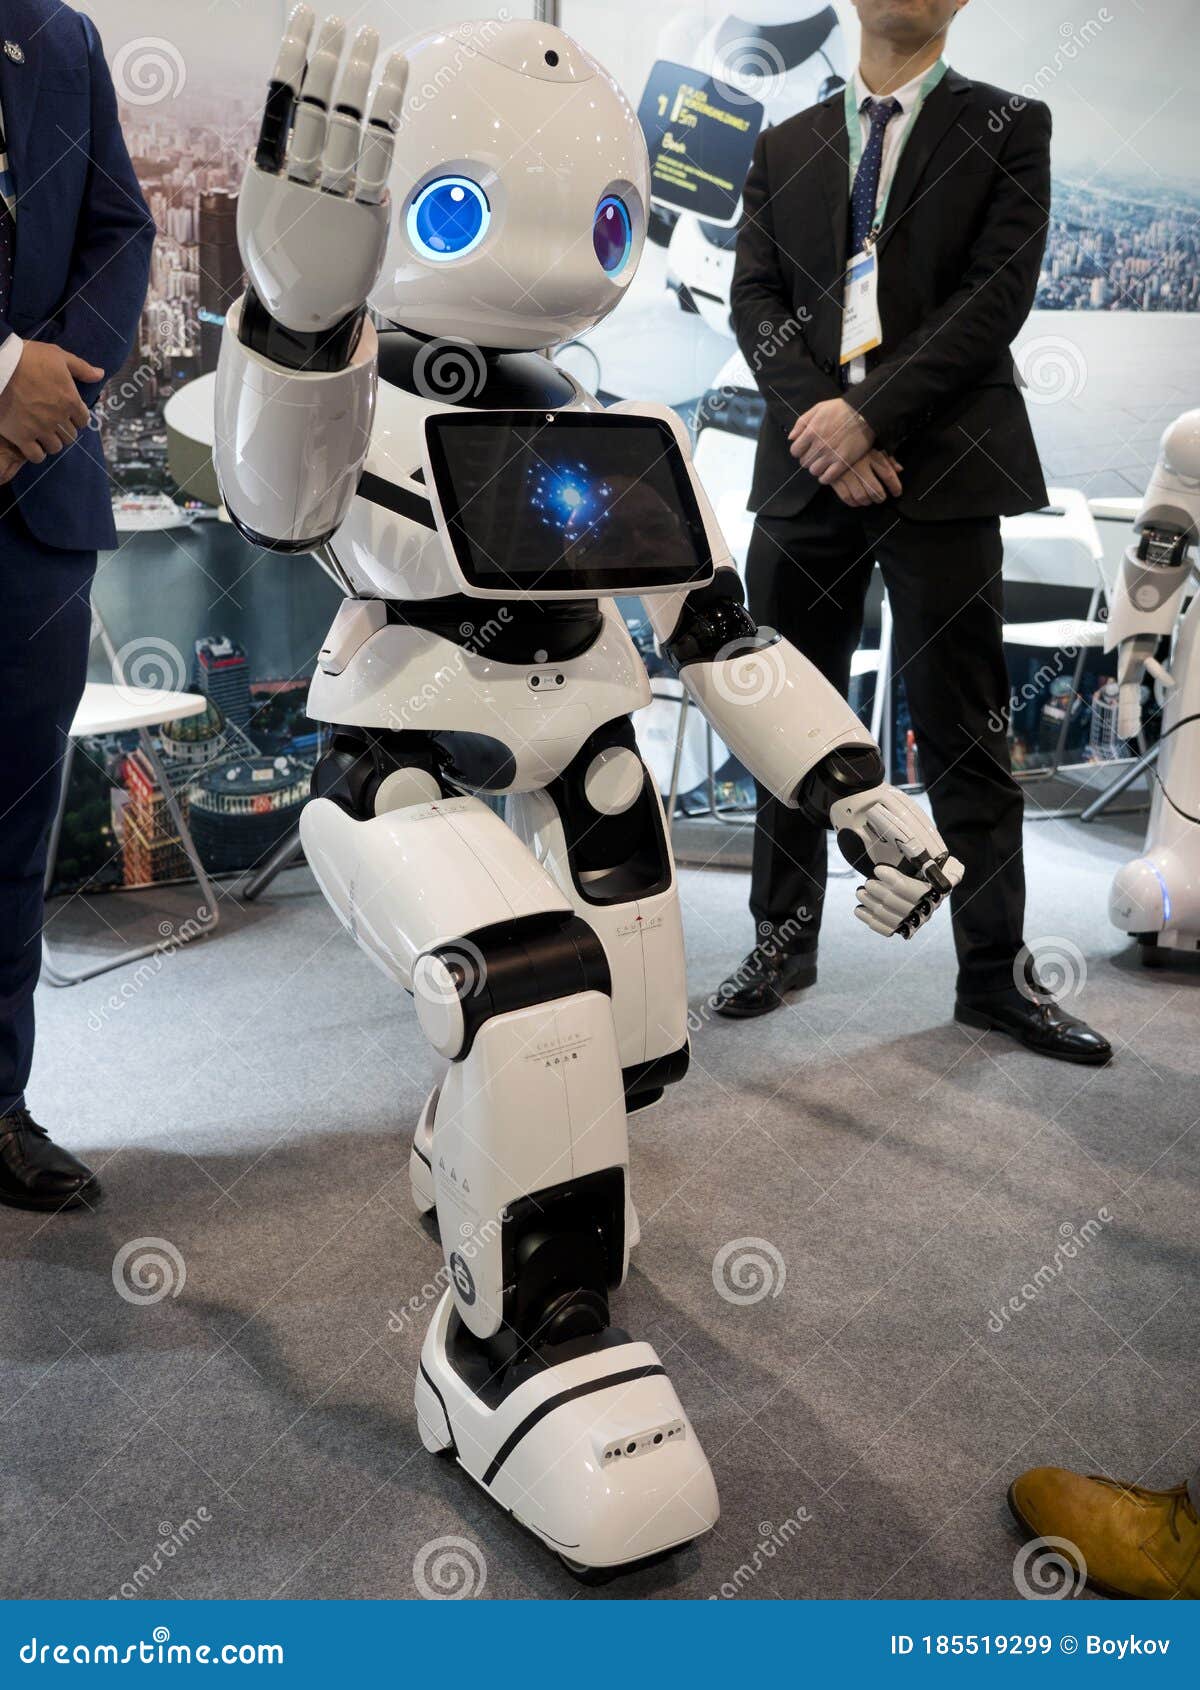 Humanoid Robot Demonstration at Consumer Electronic Show CES 2020 Stock Image - Image of entertainment, 185519299